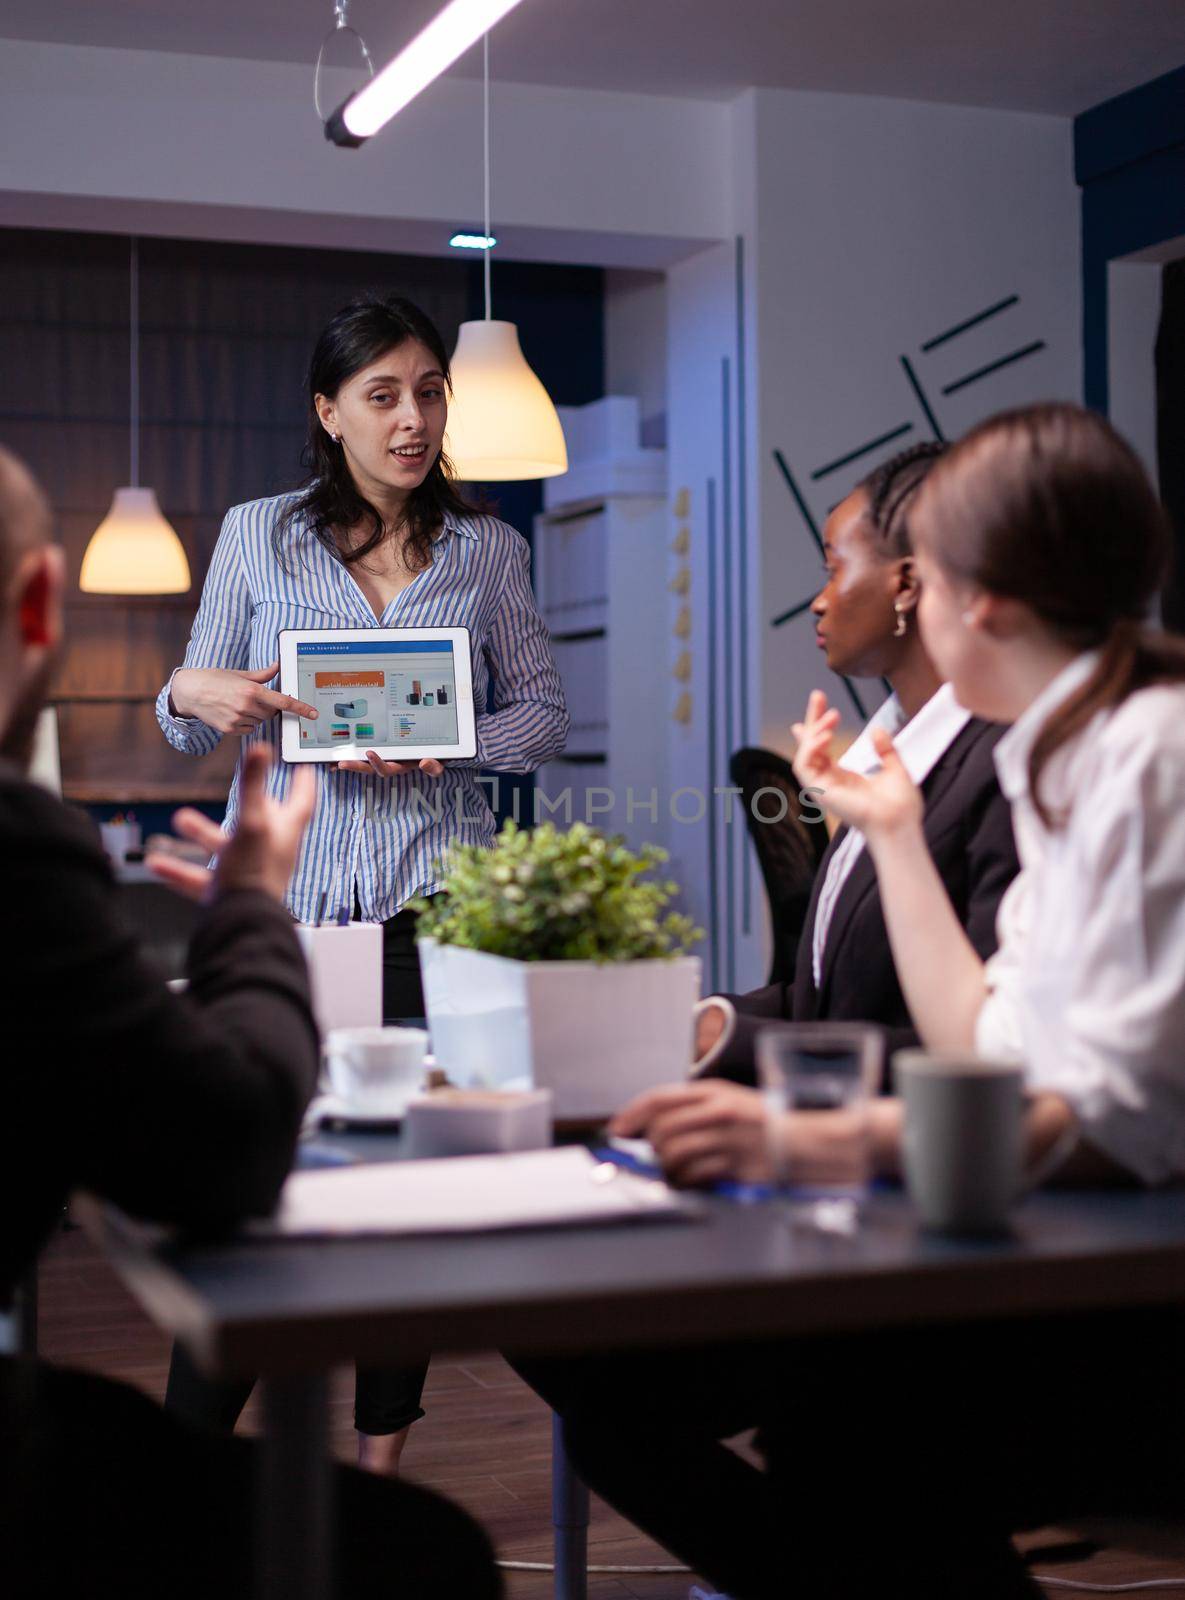 Business leader in meating room late at night discussing with her team by DCStudio